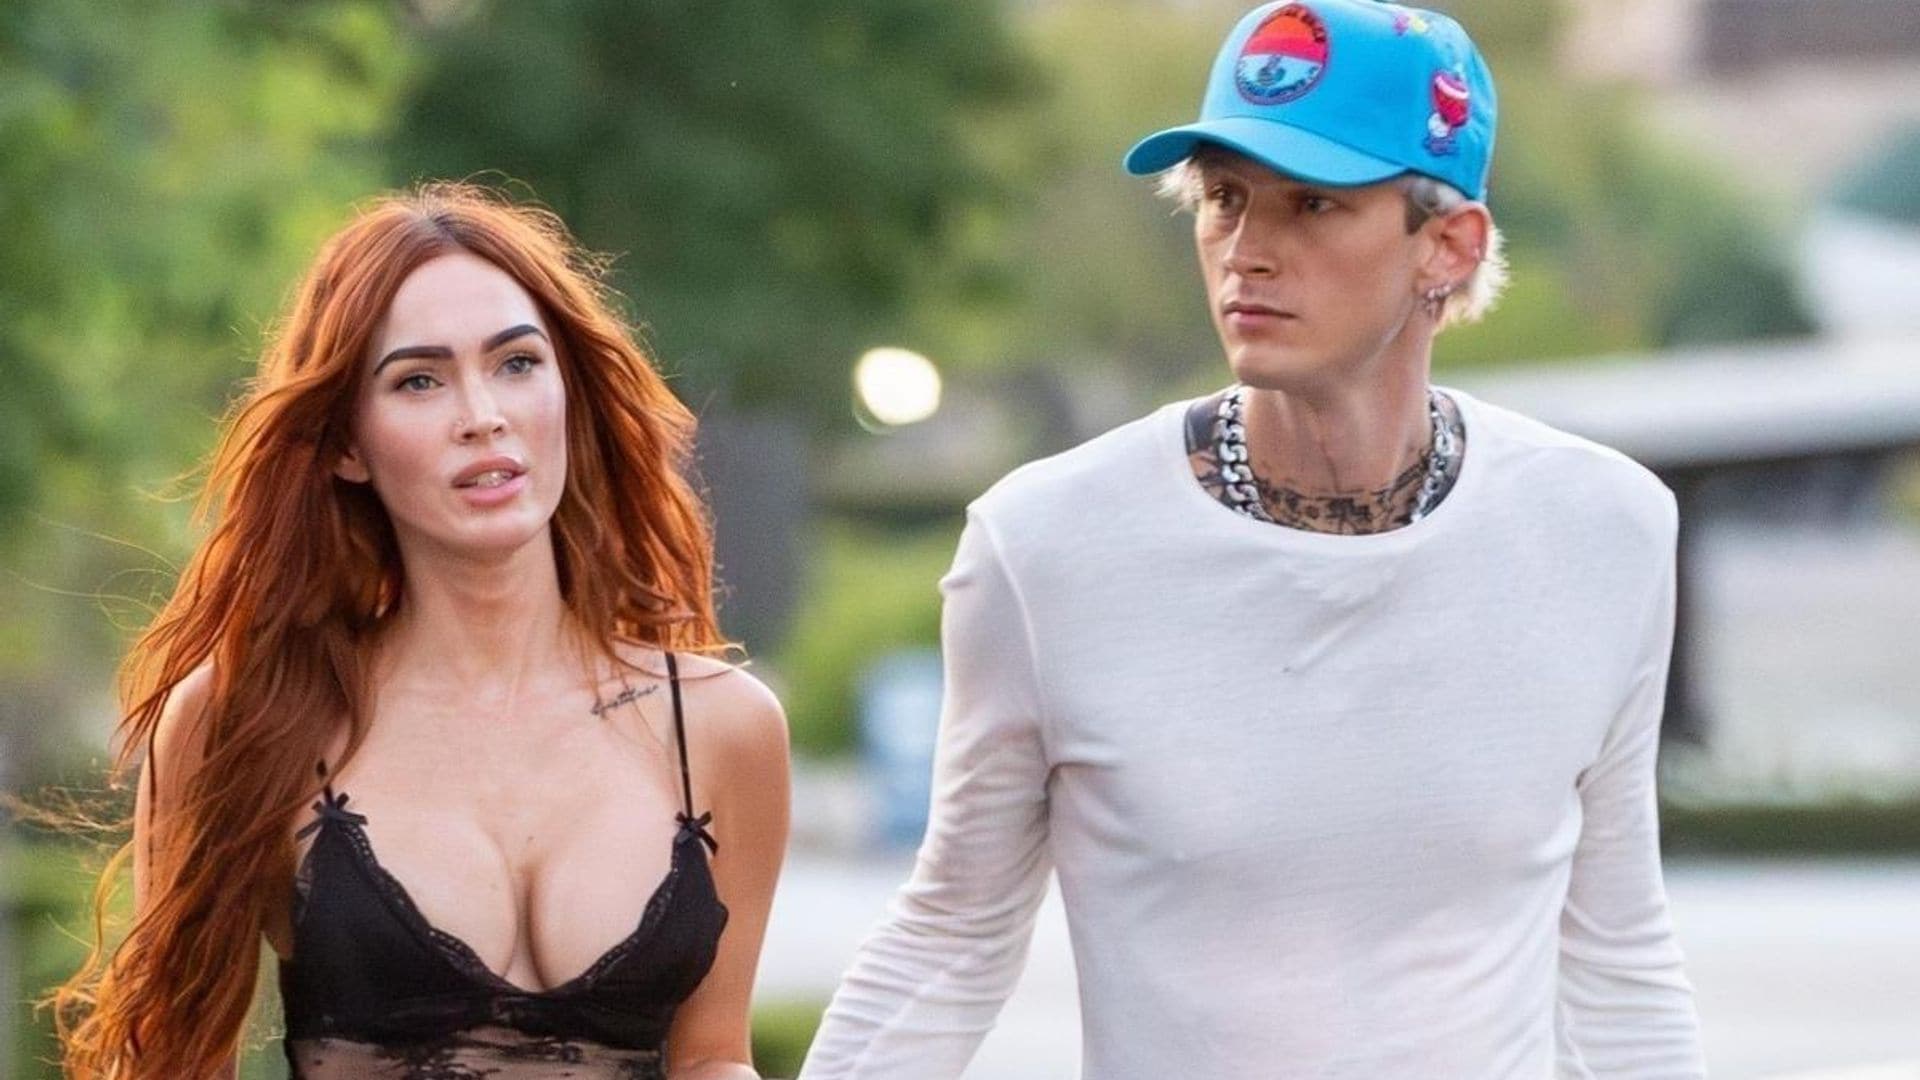 Megan Fox and Machine Gun Kelly are engaged but ‘not wedding planning’